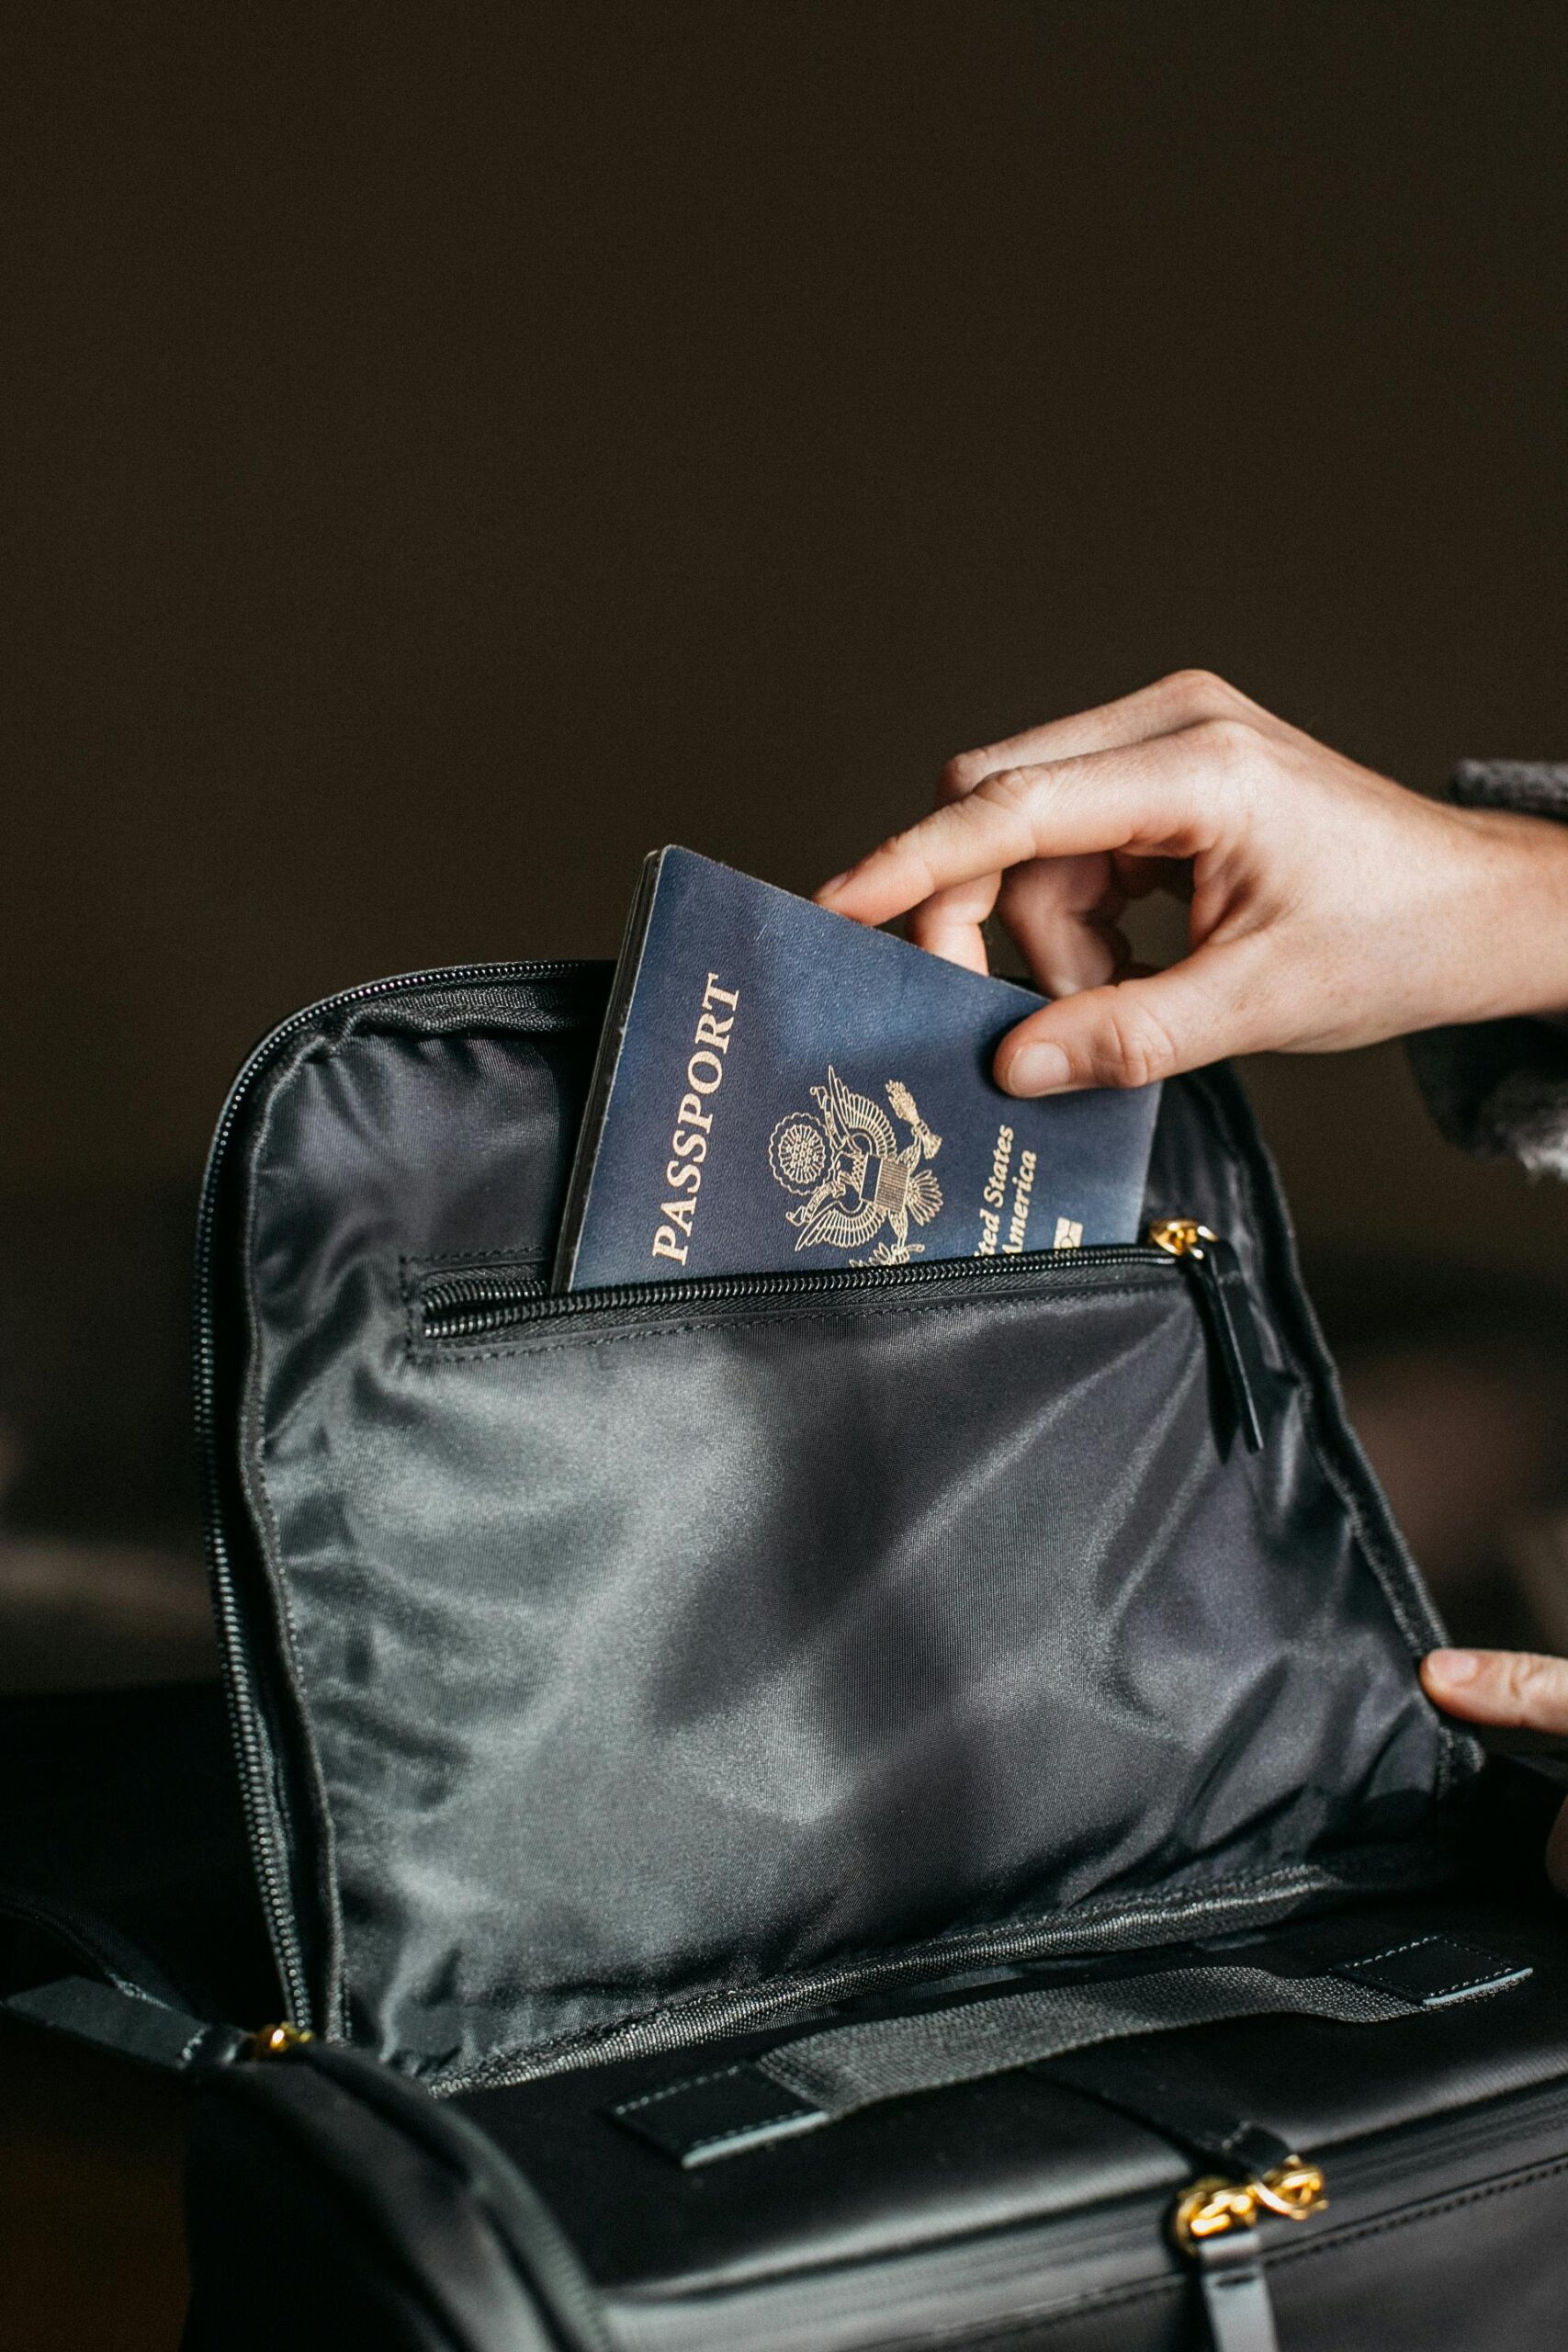 hand putting passport into bag after applying for a non-b visa for working in thailand